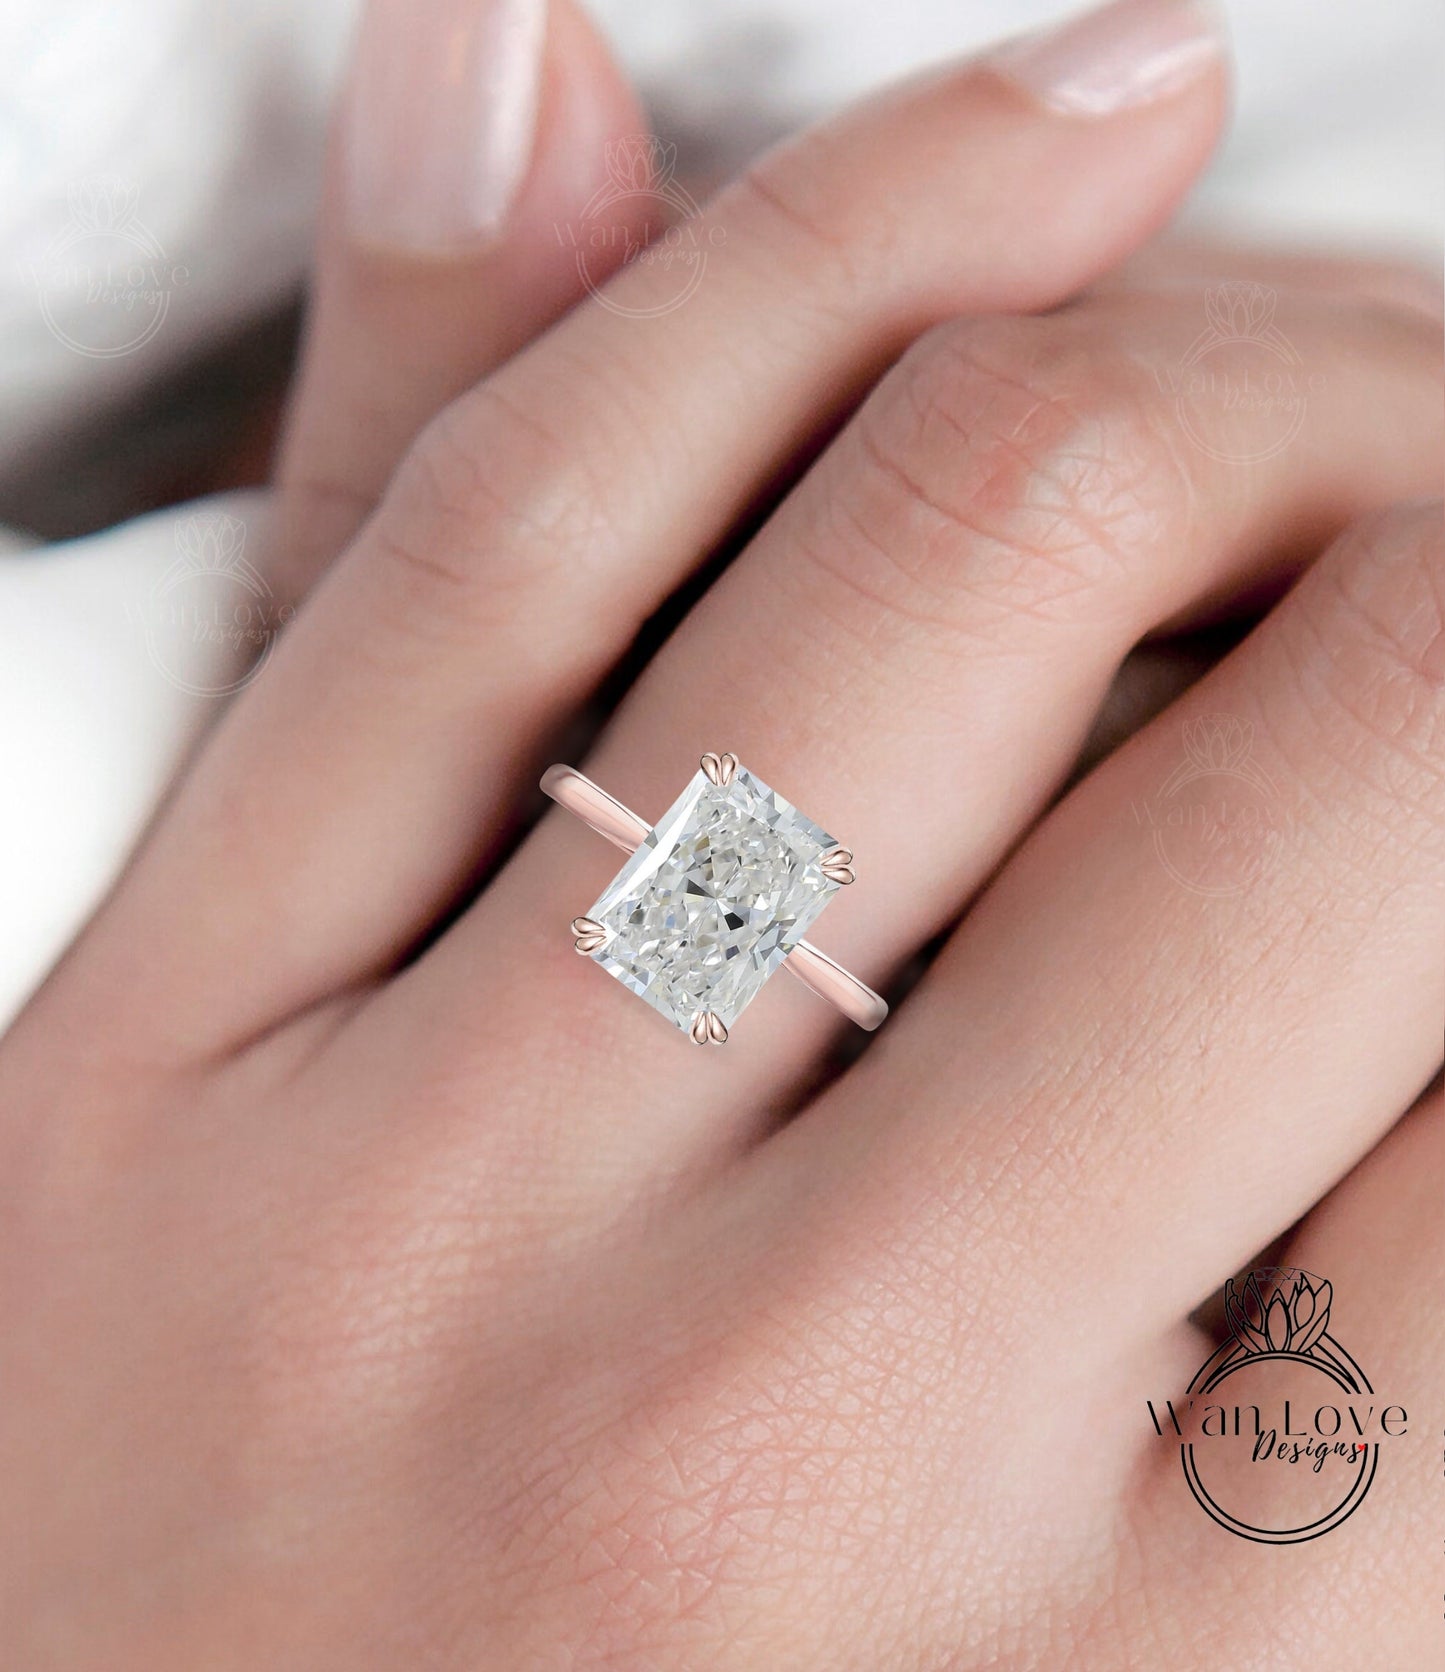 Radiant Diamond engagement ring white gold Lab Diamond ring prong vintage solitaire Unique wedding Bridal Promise Anniversary ring Wan Love Designs